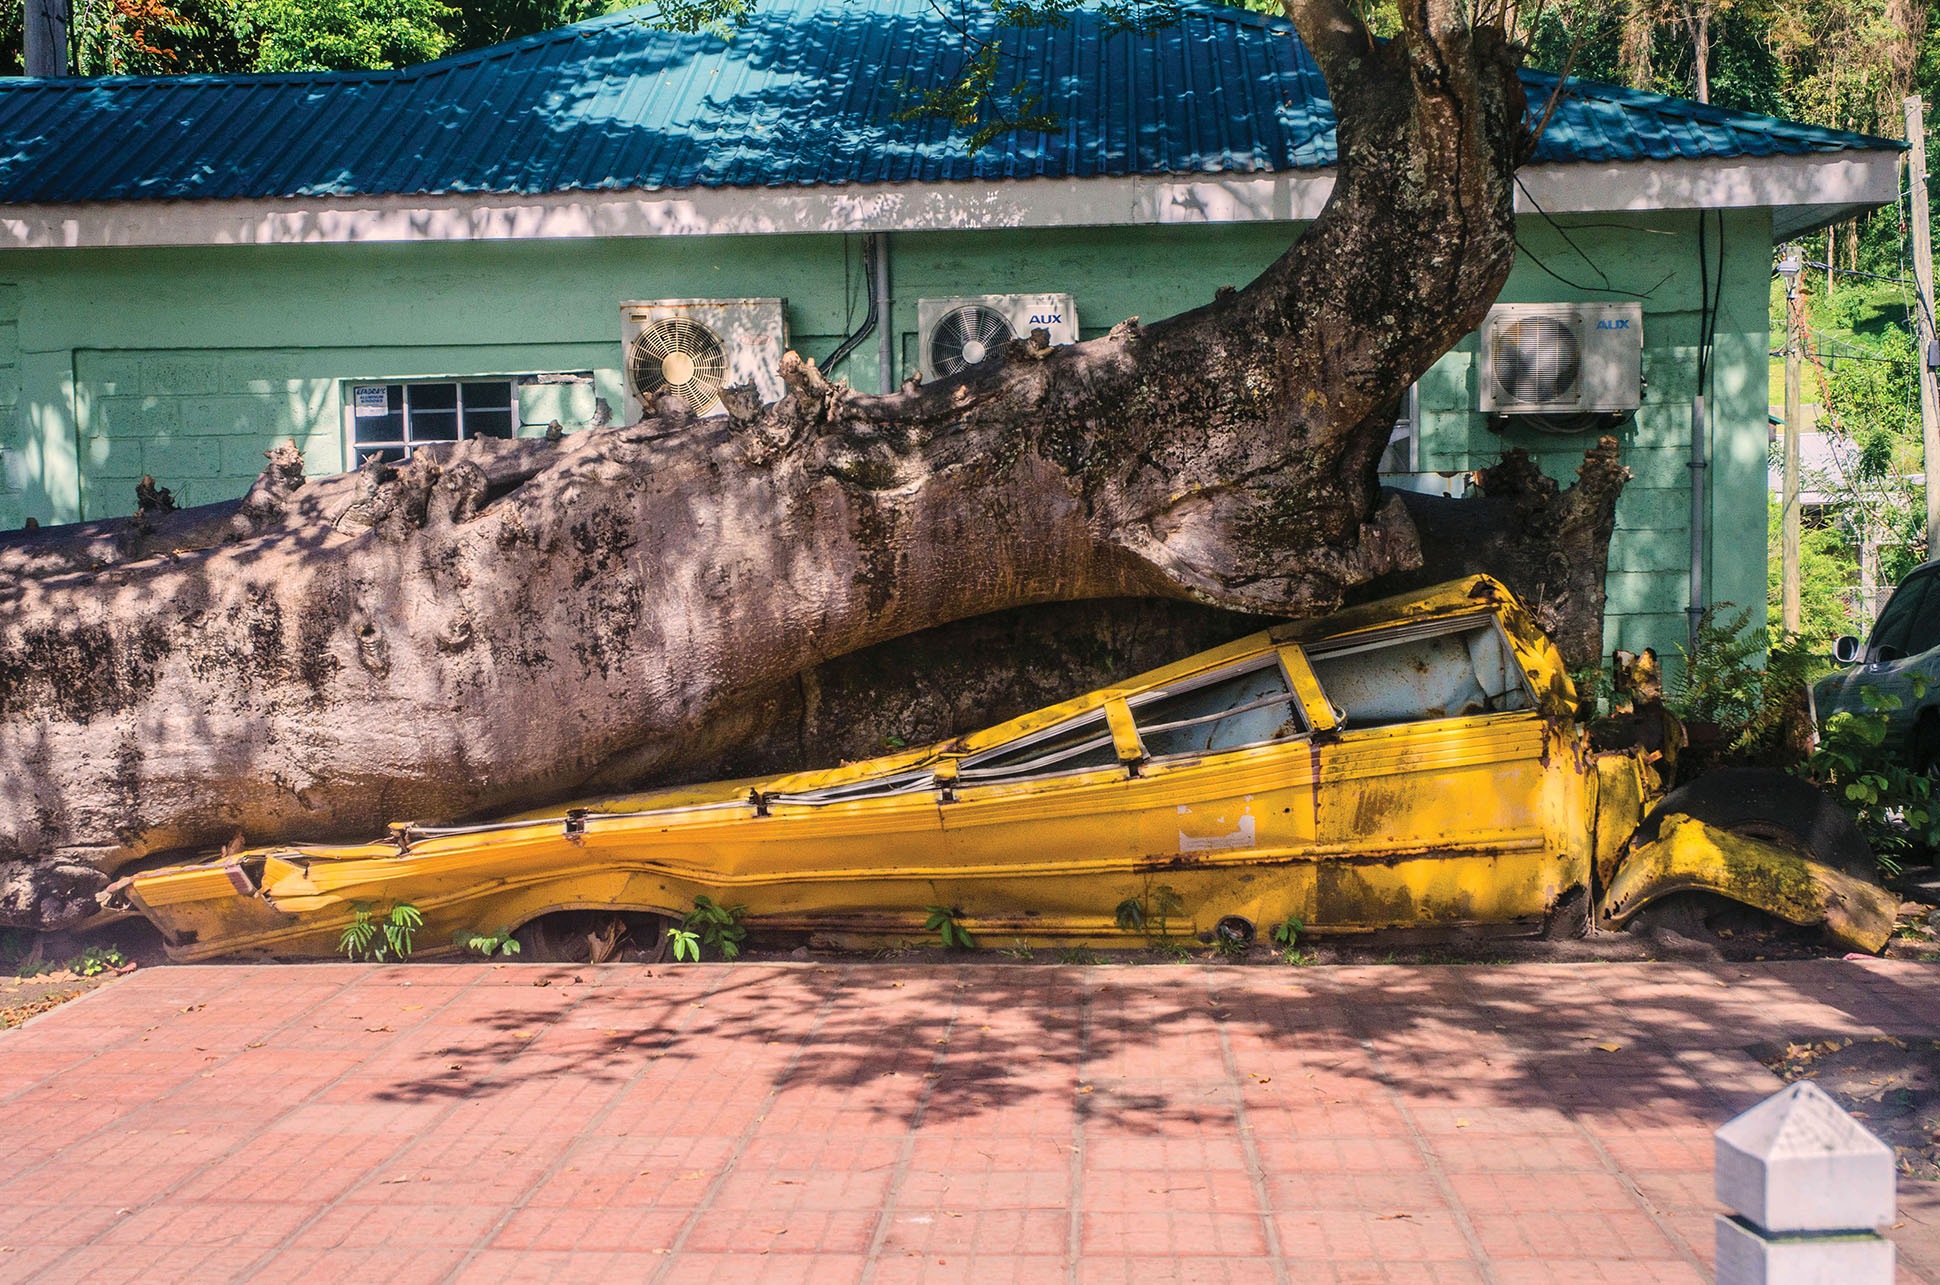 A tree grows through a crushed schoolbus from Hurricane David (1979), which remains as a memorial on the island of Dominica. (Photo by Wayne Hsieh.)